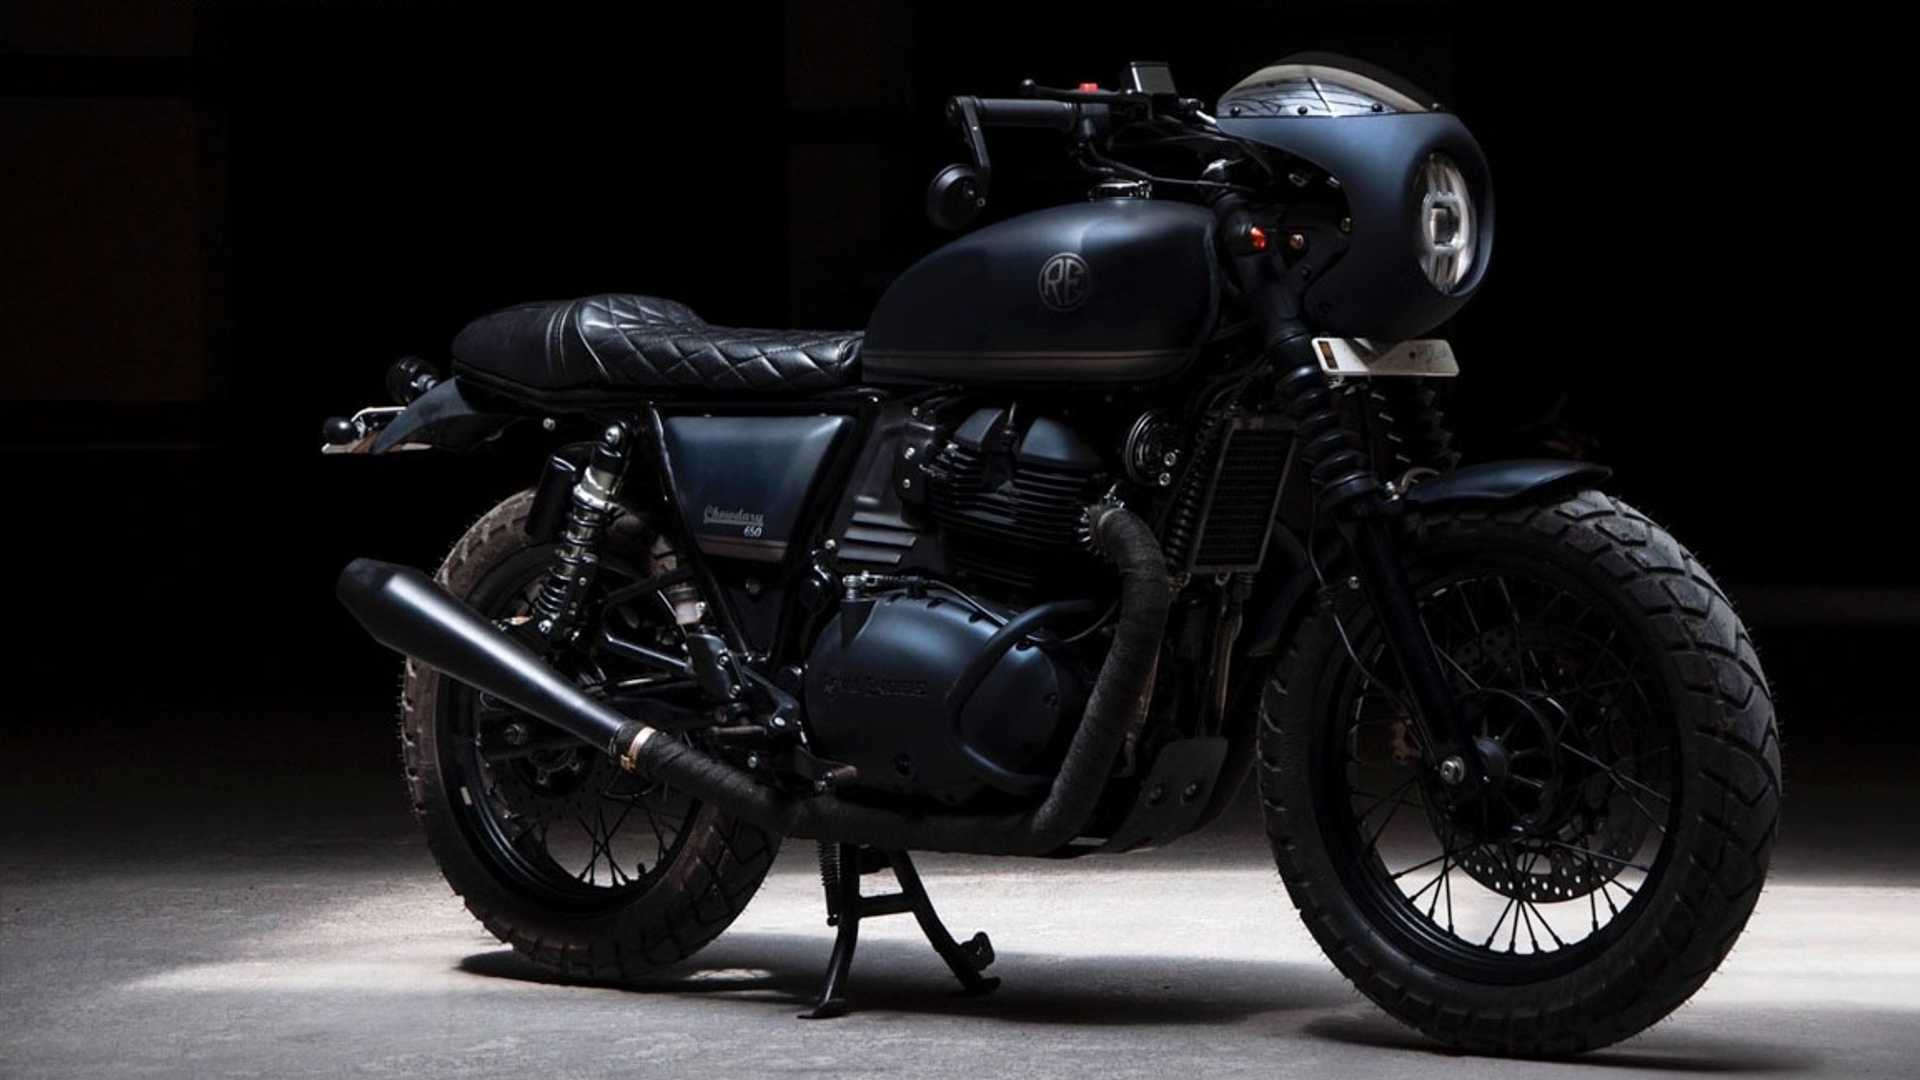 This Custom Royal Enfield Interceptor Is A Stealth Bomber